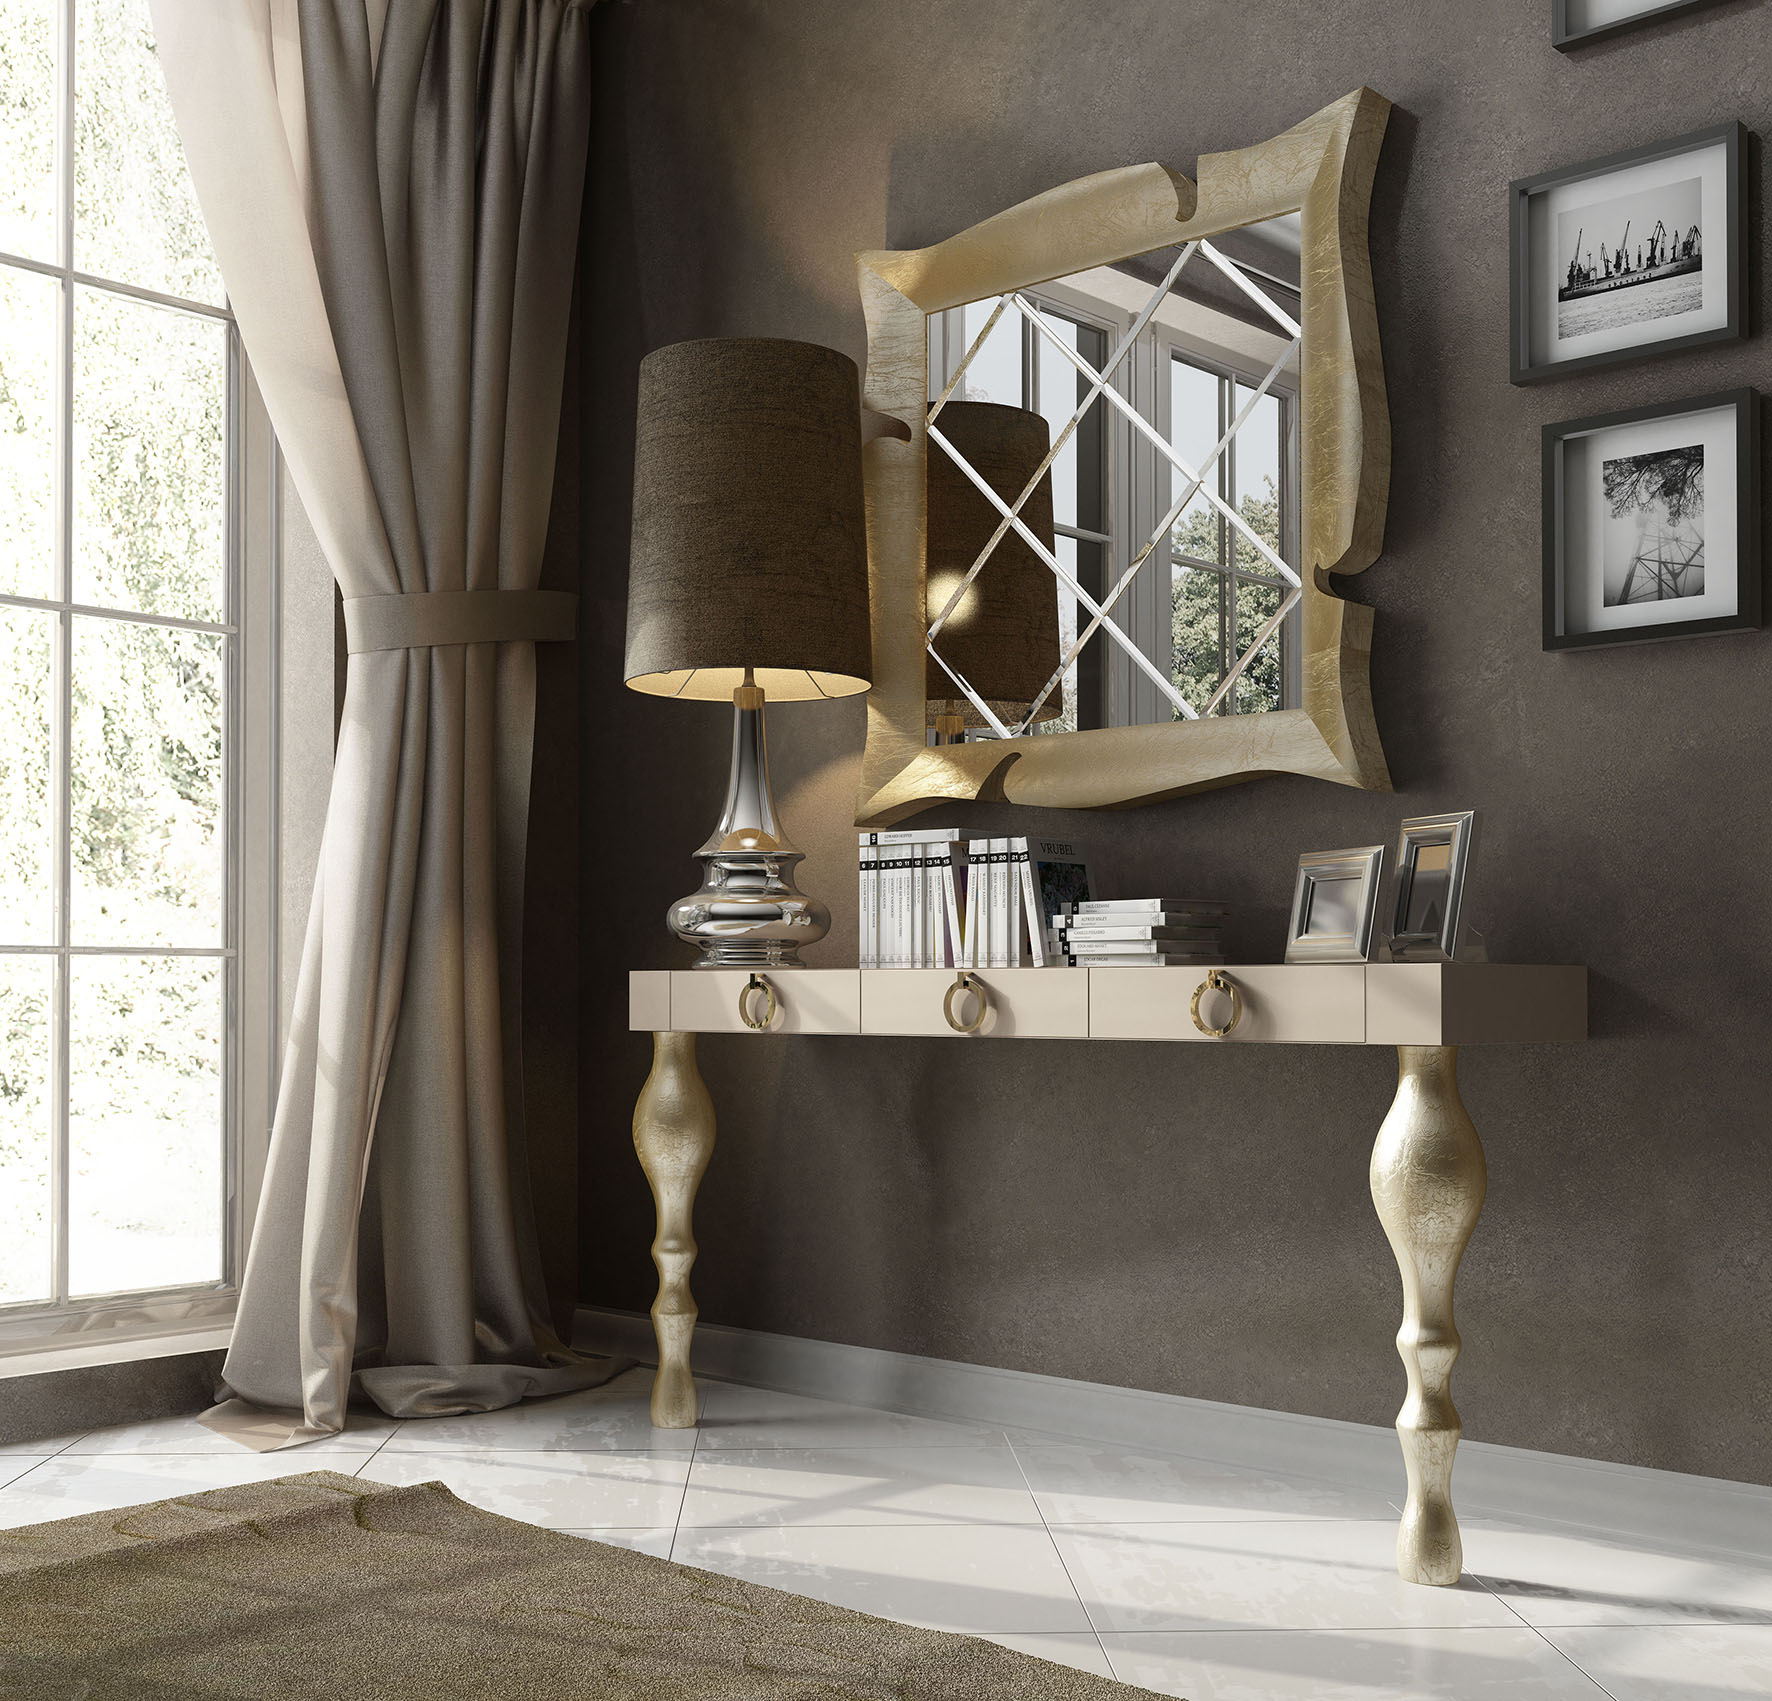 Brands Franco Kora Dining and Wall Units, Spain CII.20 Console Table